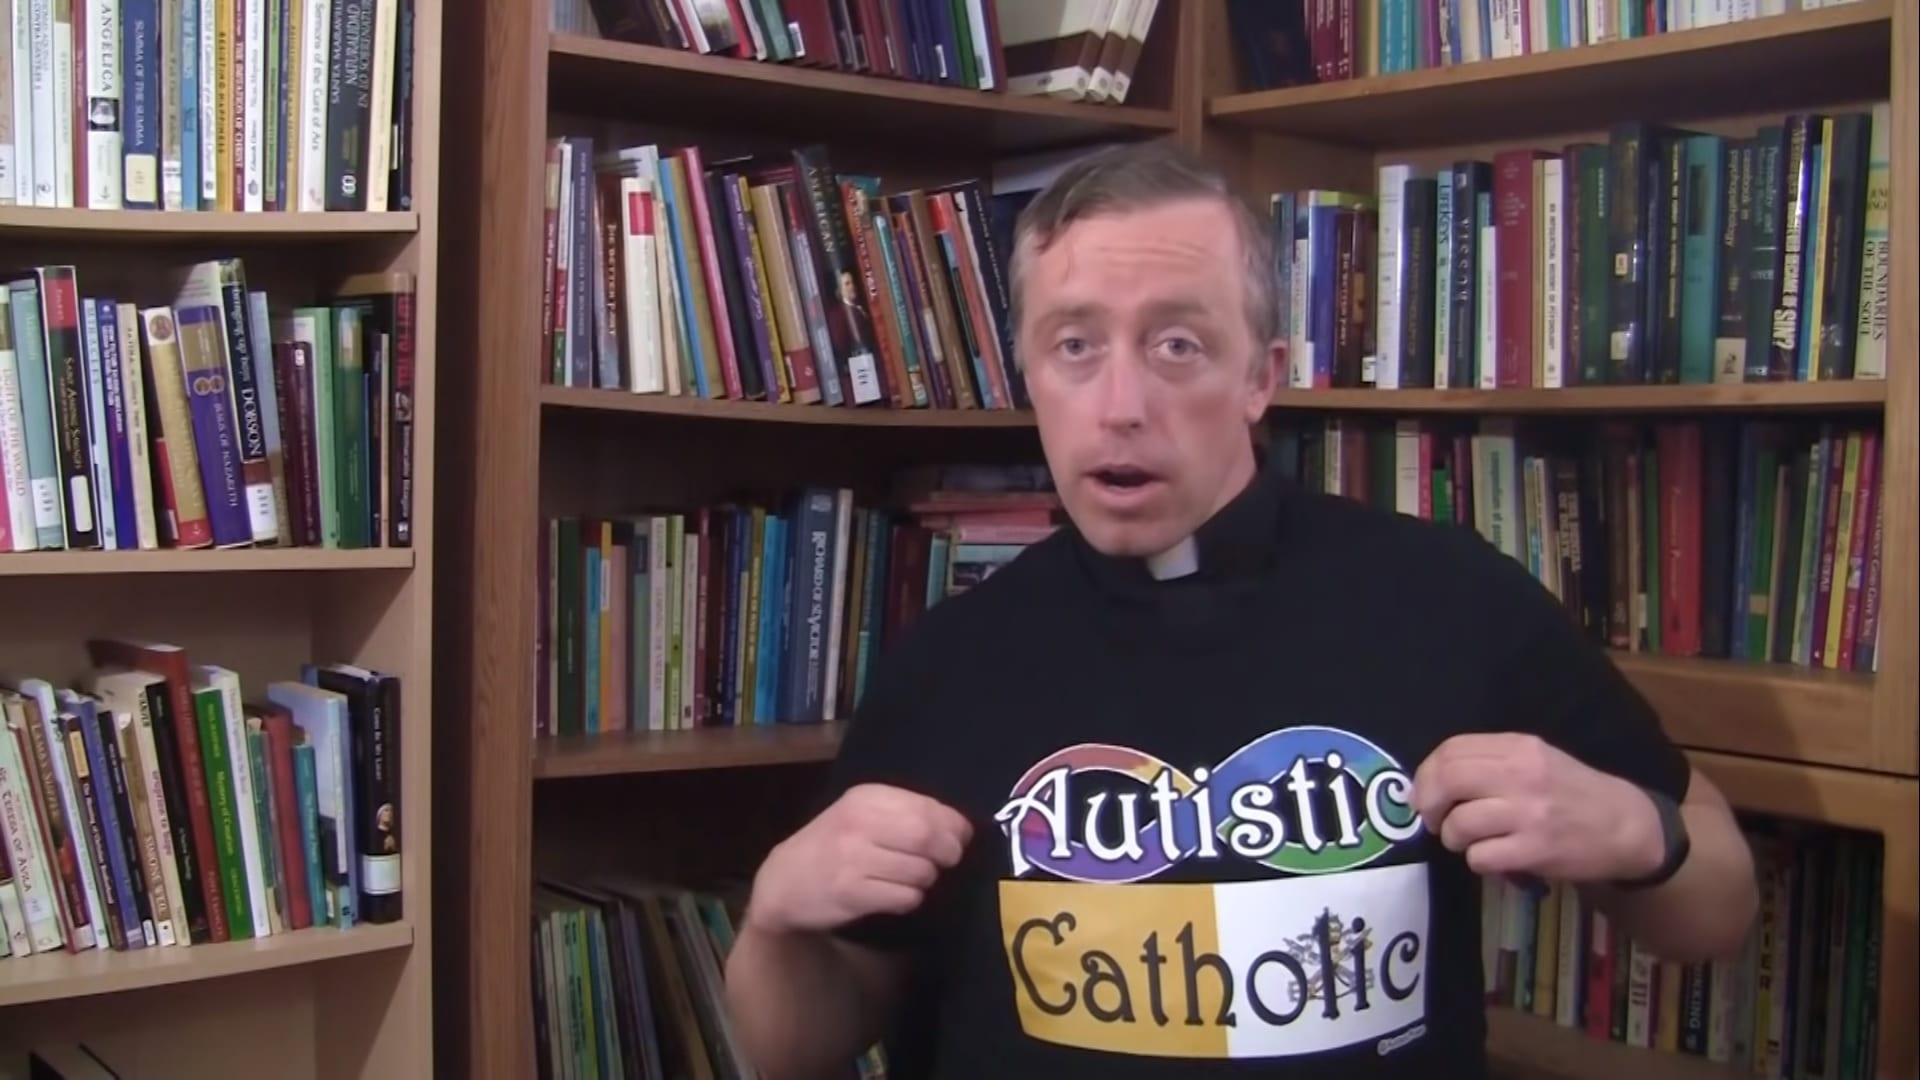 Priest who went public with autism dreams of doing ‘great things’